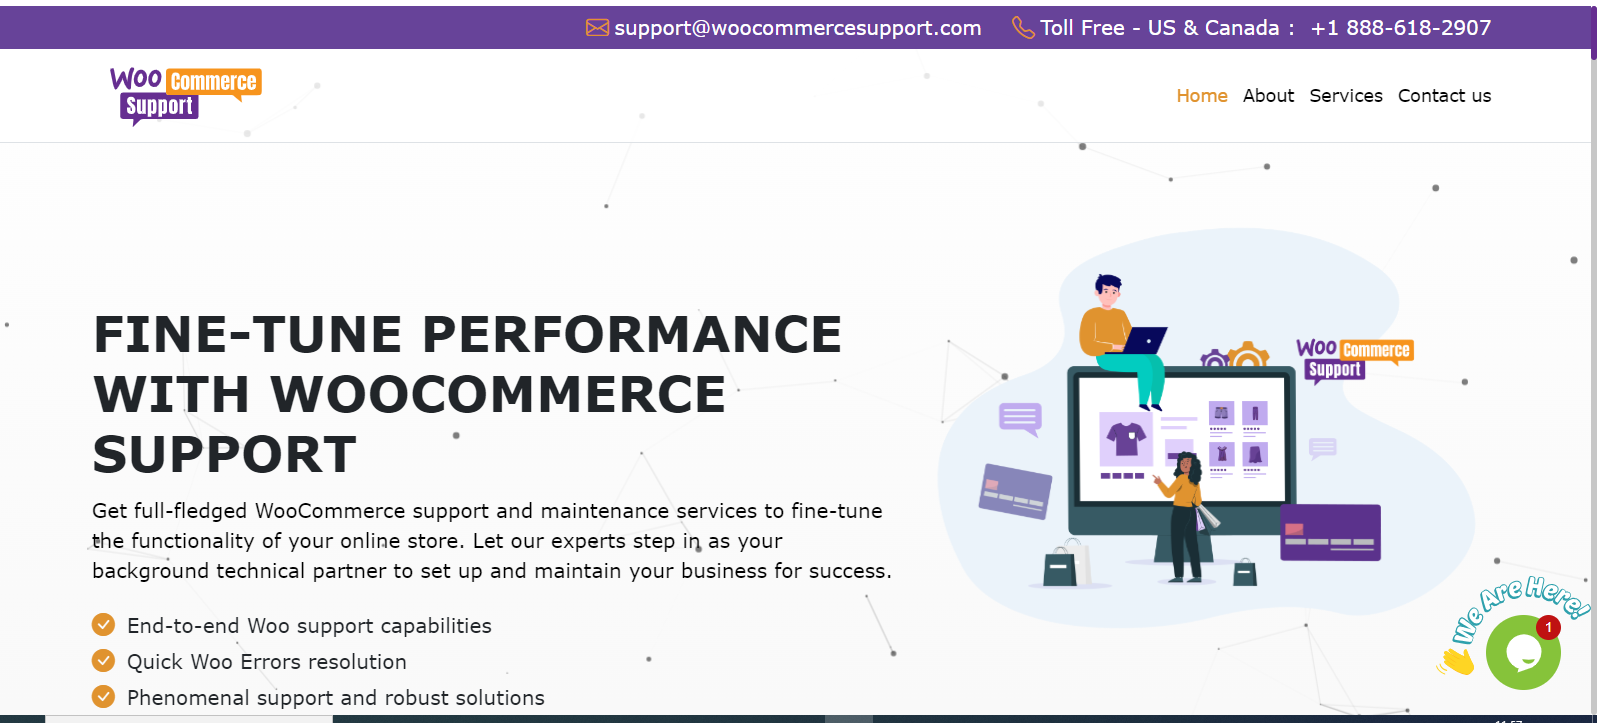 WoocommerceSupport